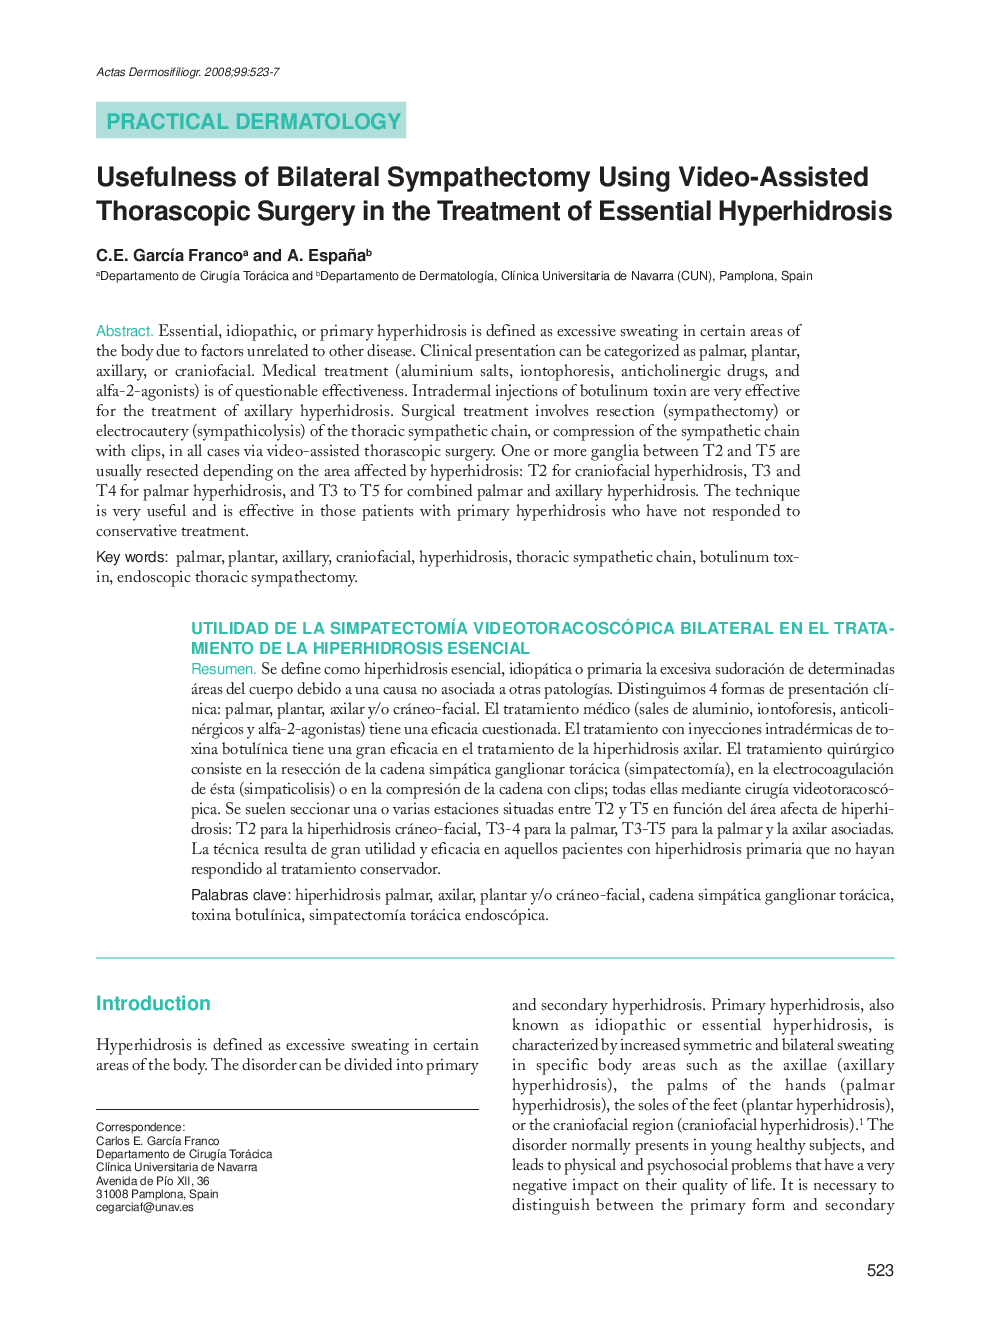 Usefulness of Bilateral Sympathectomy Using Video-Assisted Thorascopic Surgery in the Treatment of Essential Hyperhidrosis